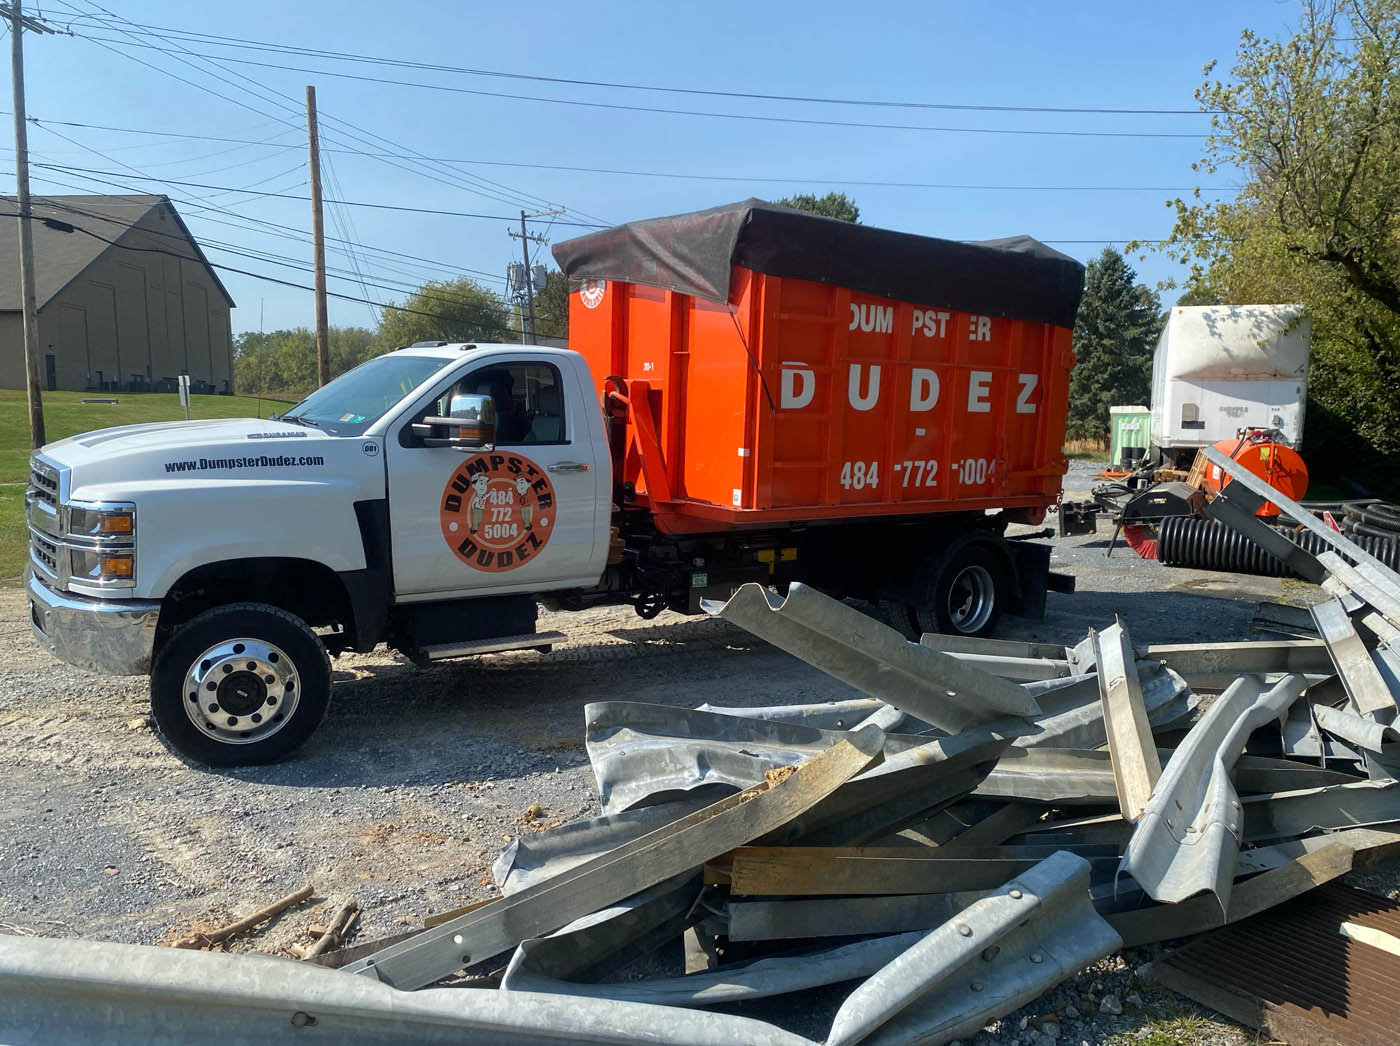 
				A Dumpster Dudez truck and dumpster in front of a large pile of debris, ready to make a large waste management project easy.
			